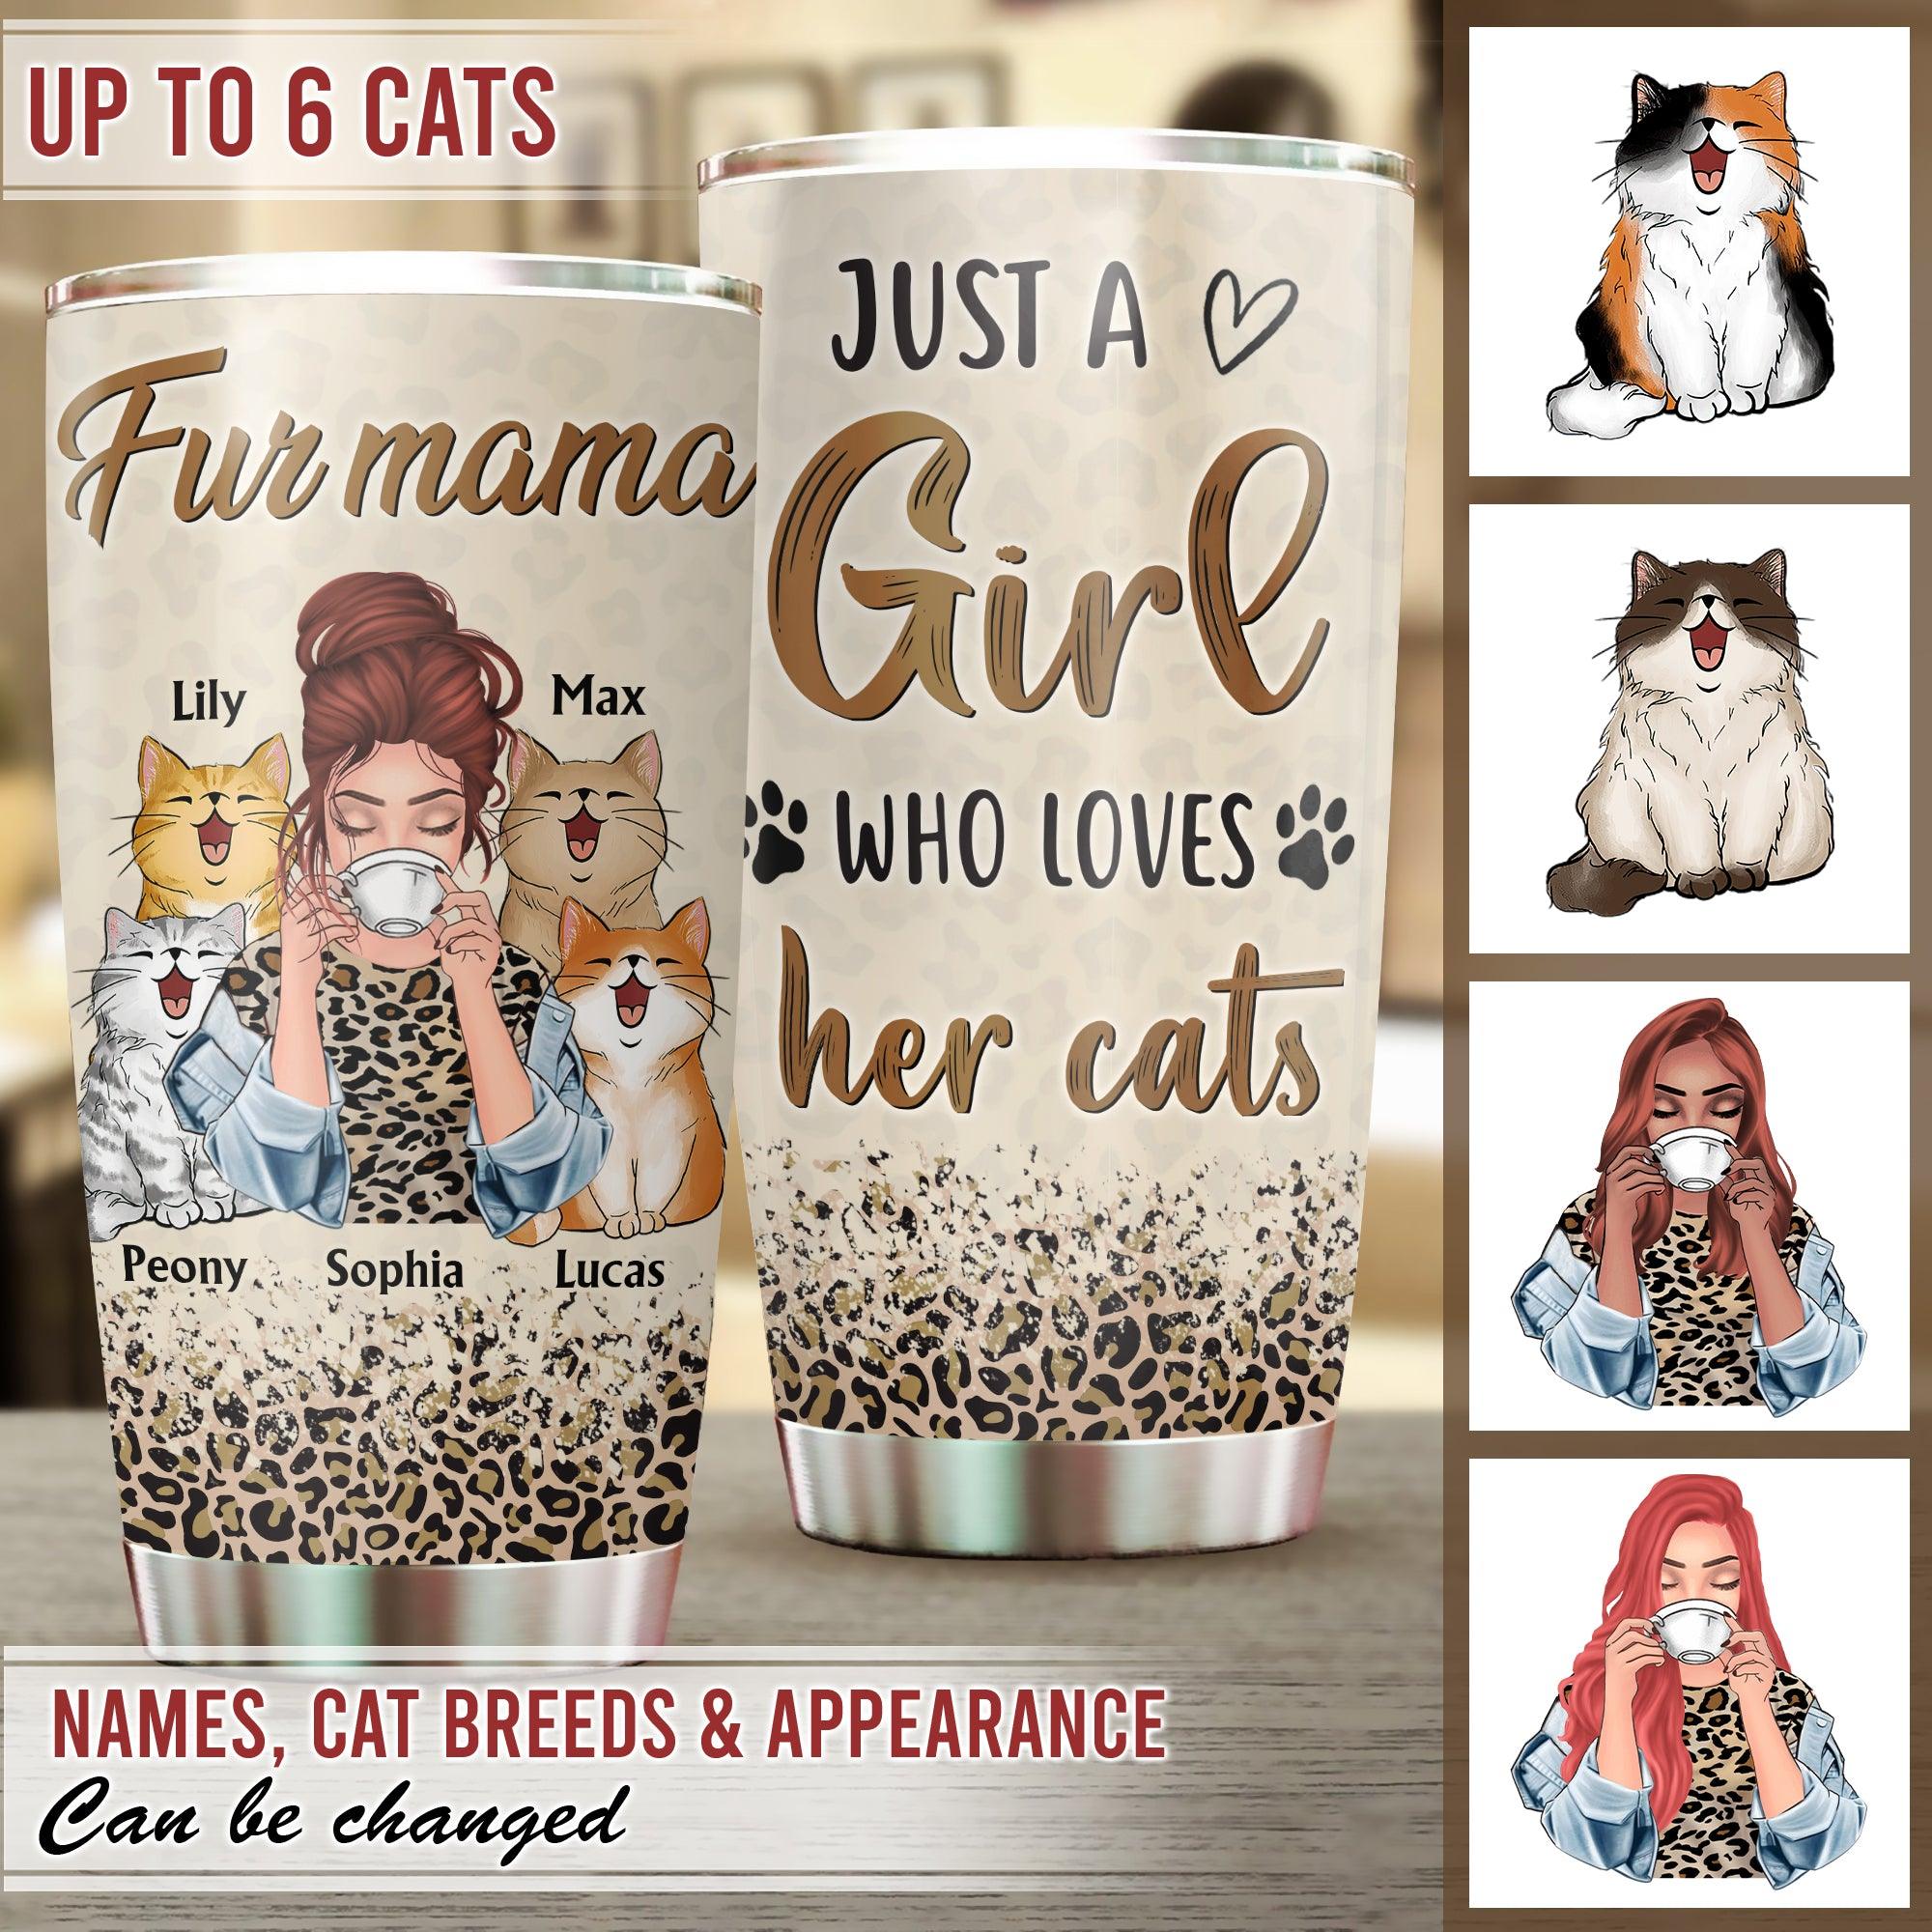 Personalized Tumbler Gift for Her